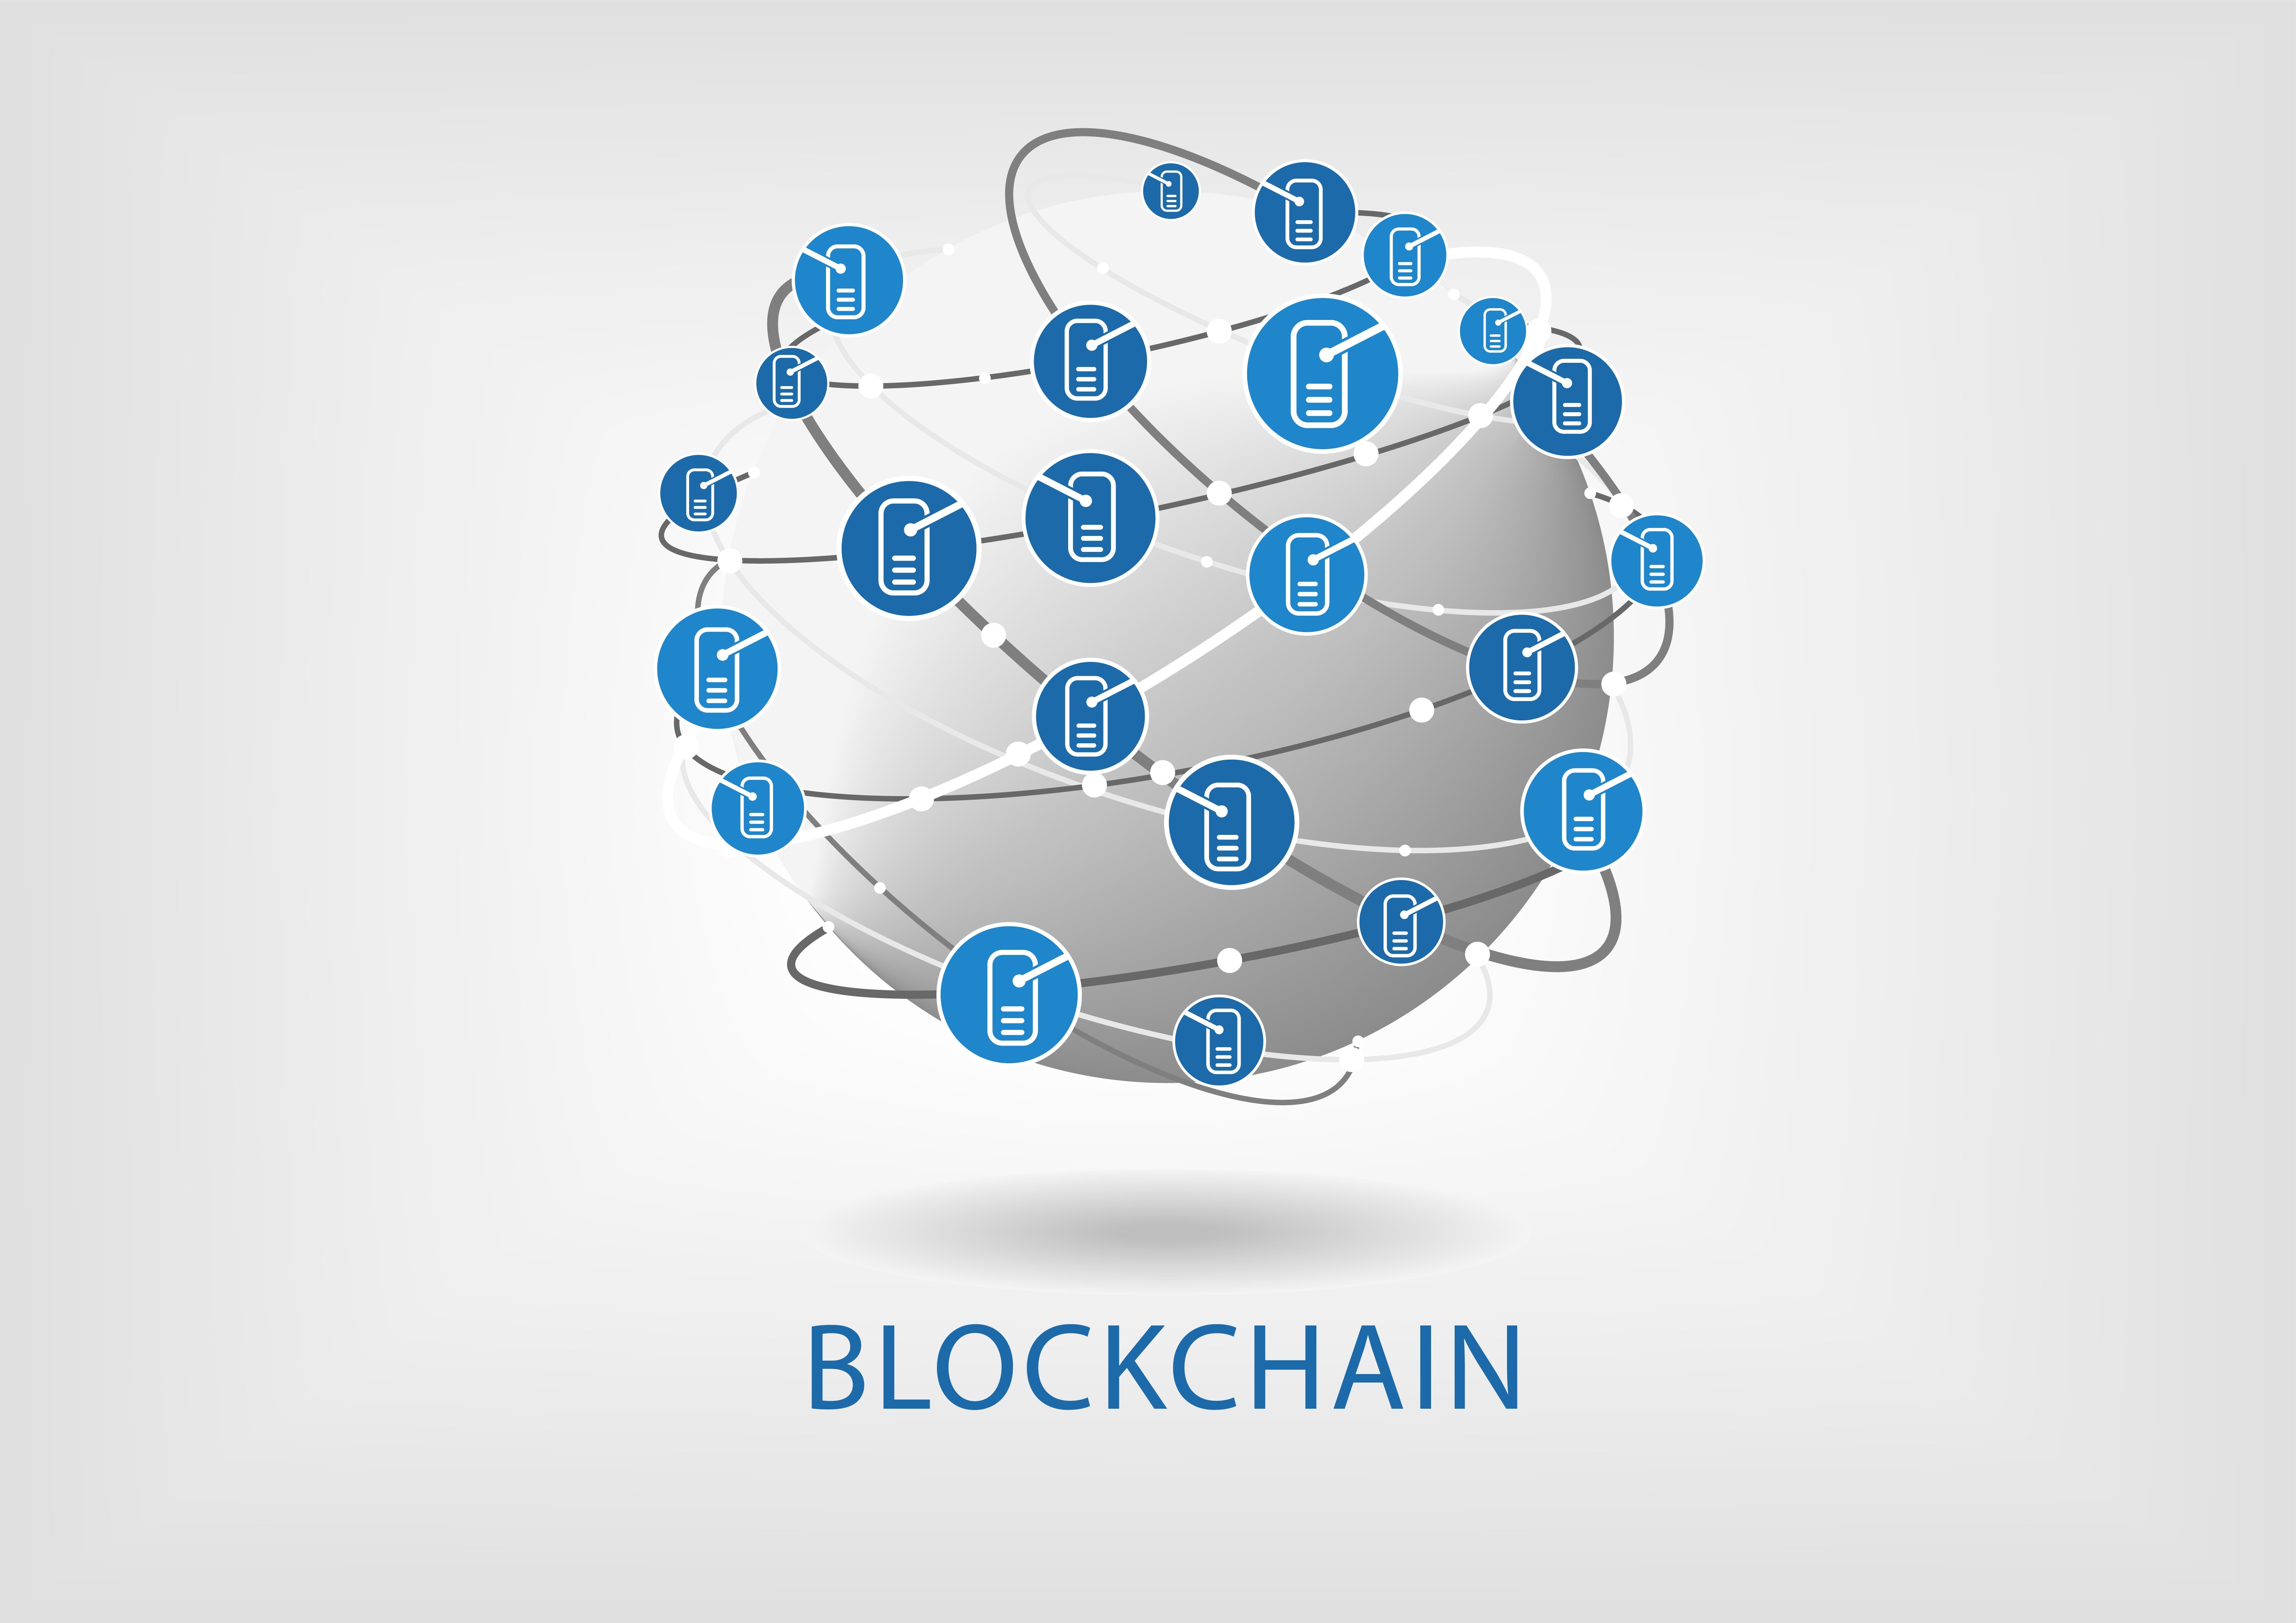 check the post:A Newbie's Guide to Blockchain for a description of the image 